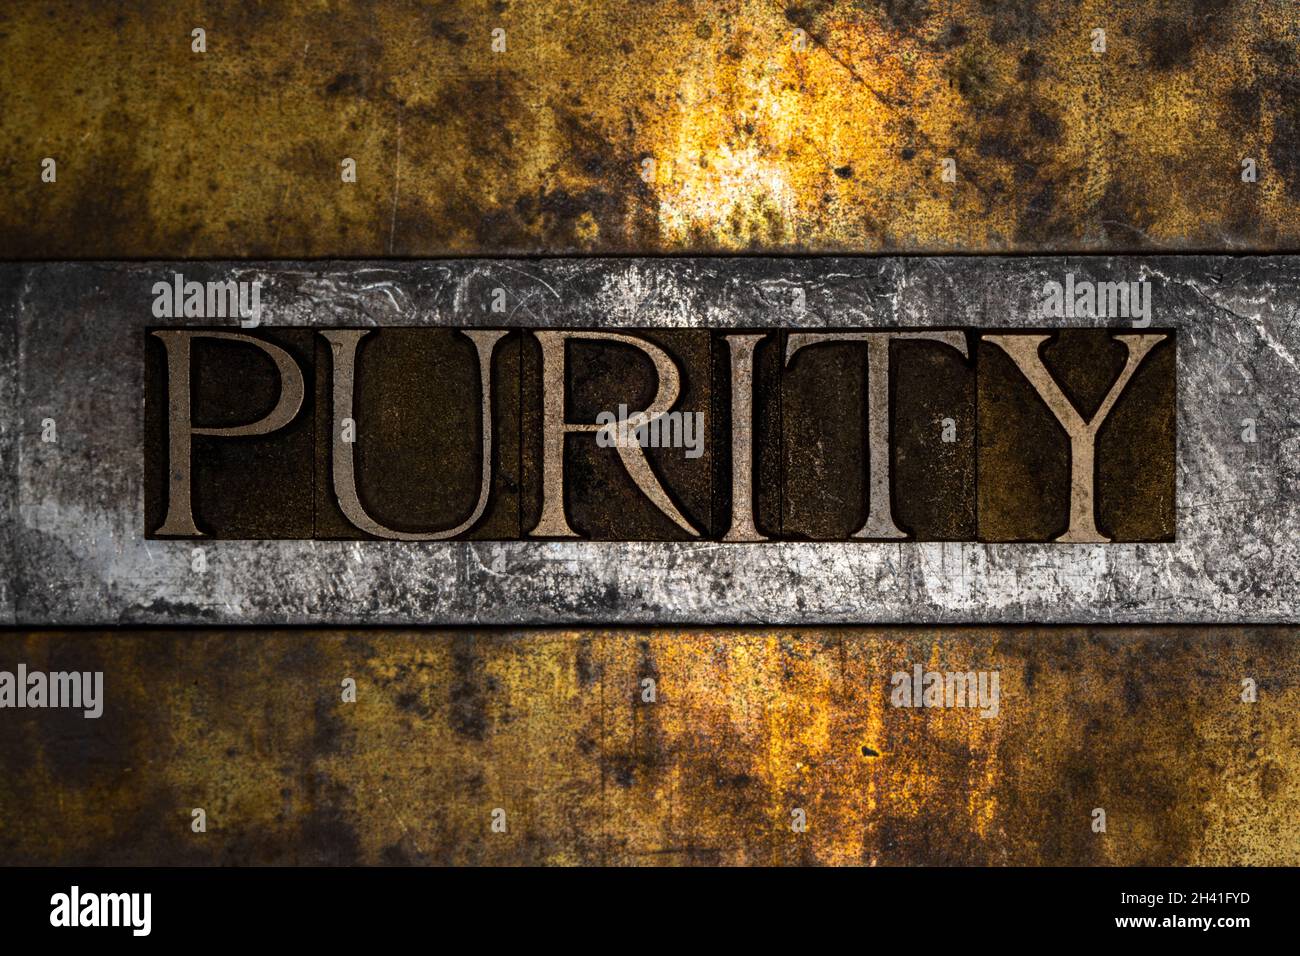 Purity text message on textured grunge copper and vintage gold background Stock Photo